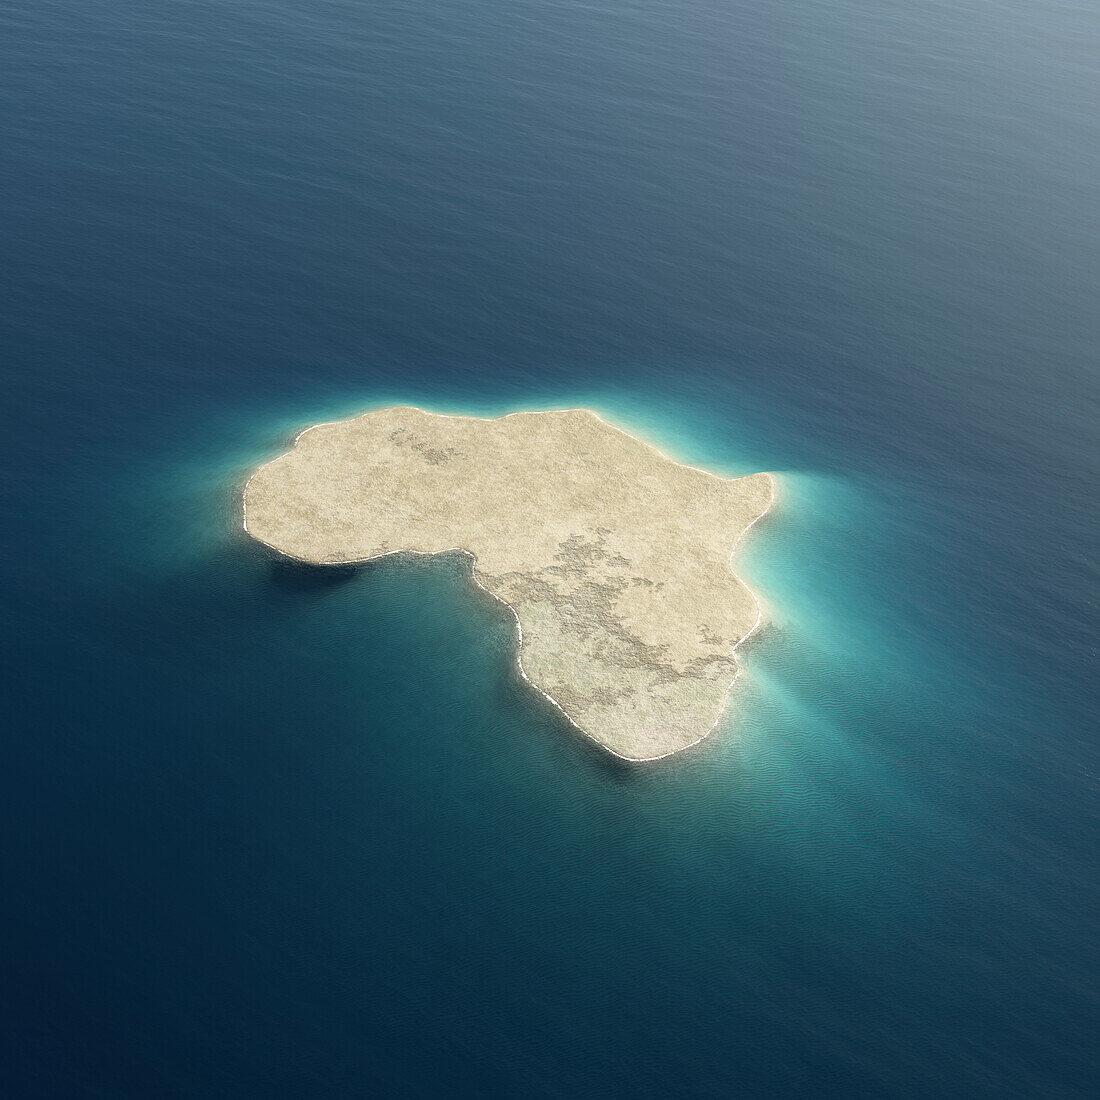 Africa as an island, conceptual illustration